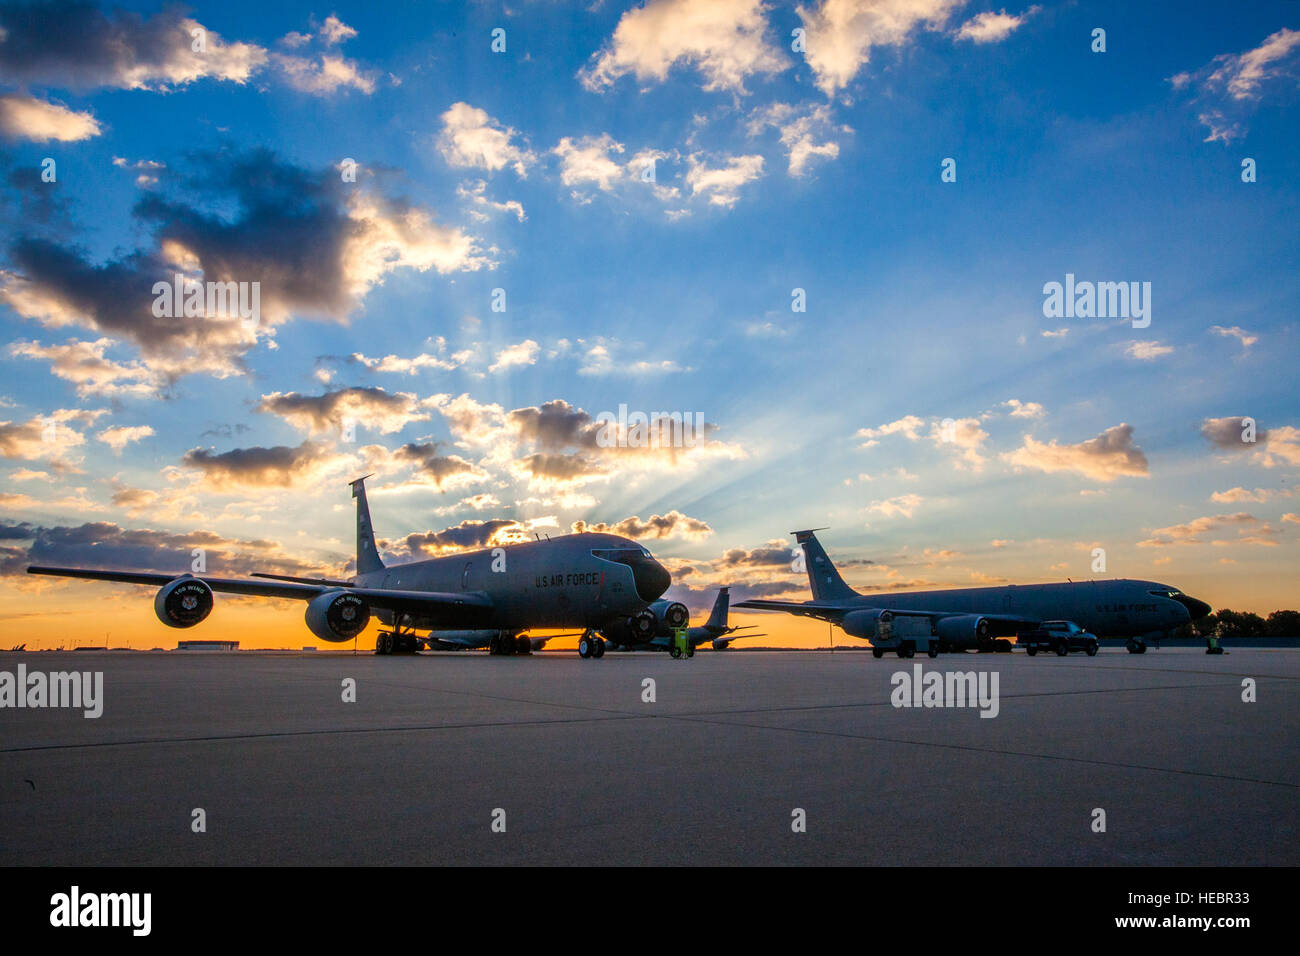 The sun rises Sept. 26, 2014, above KC-135R Stratotankers on the New Jersey Air National Guard flightline at Joint Base McGuire-Dix-Lakehurst, N.J. The KC-135Rs belong to the 108th Wing. (U.S. Air National Guard photo/Master Sgt. Mark C. Olsen) Stock Photo